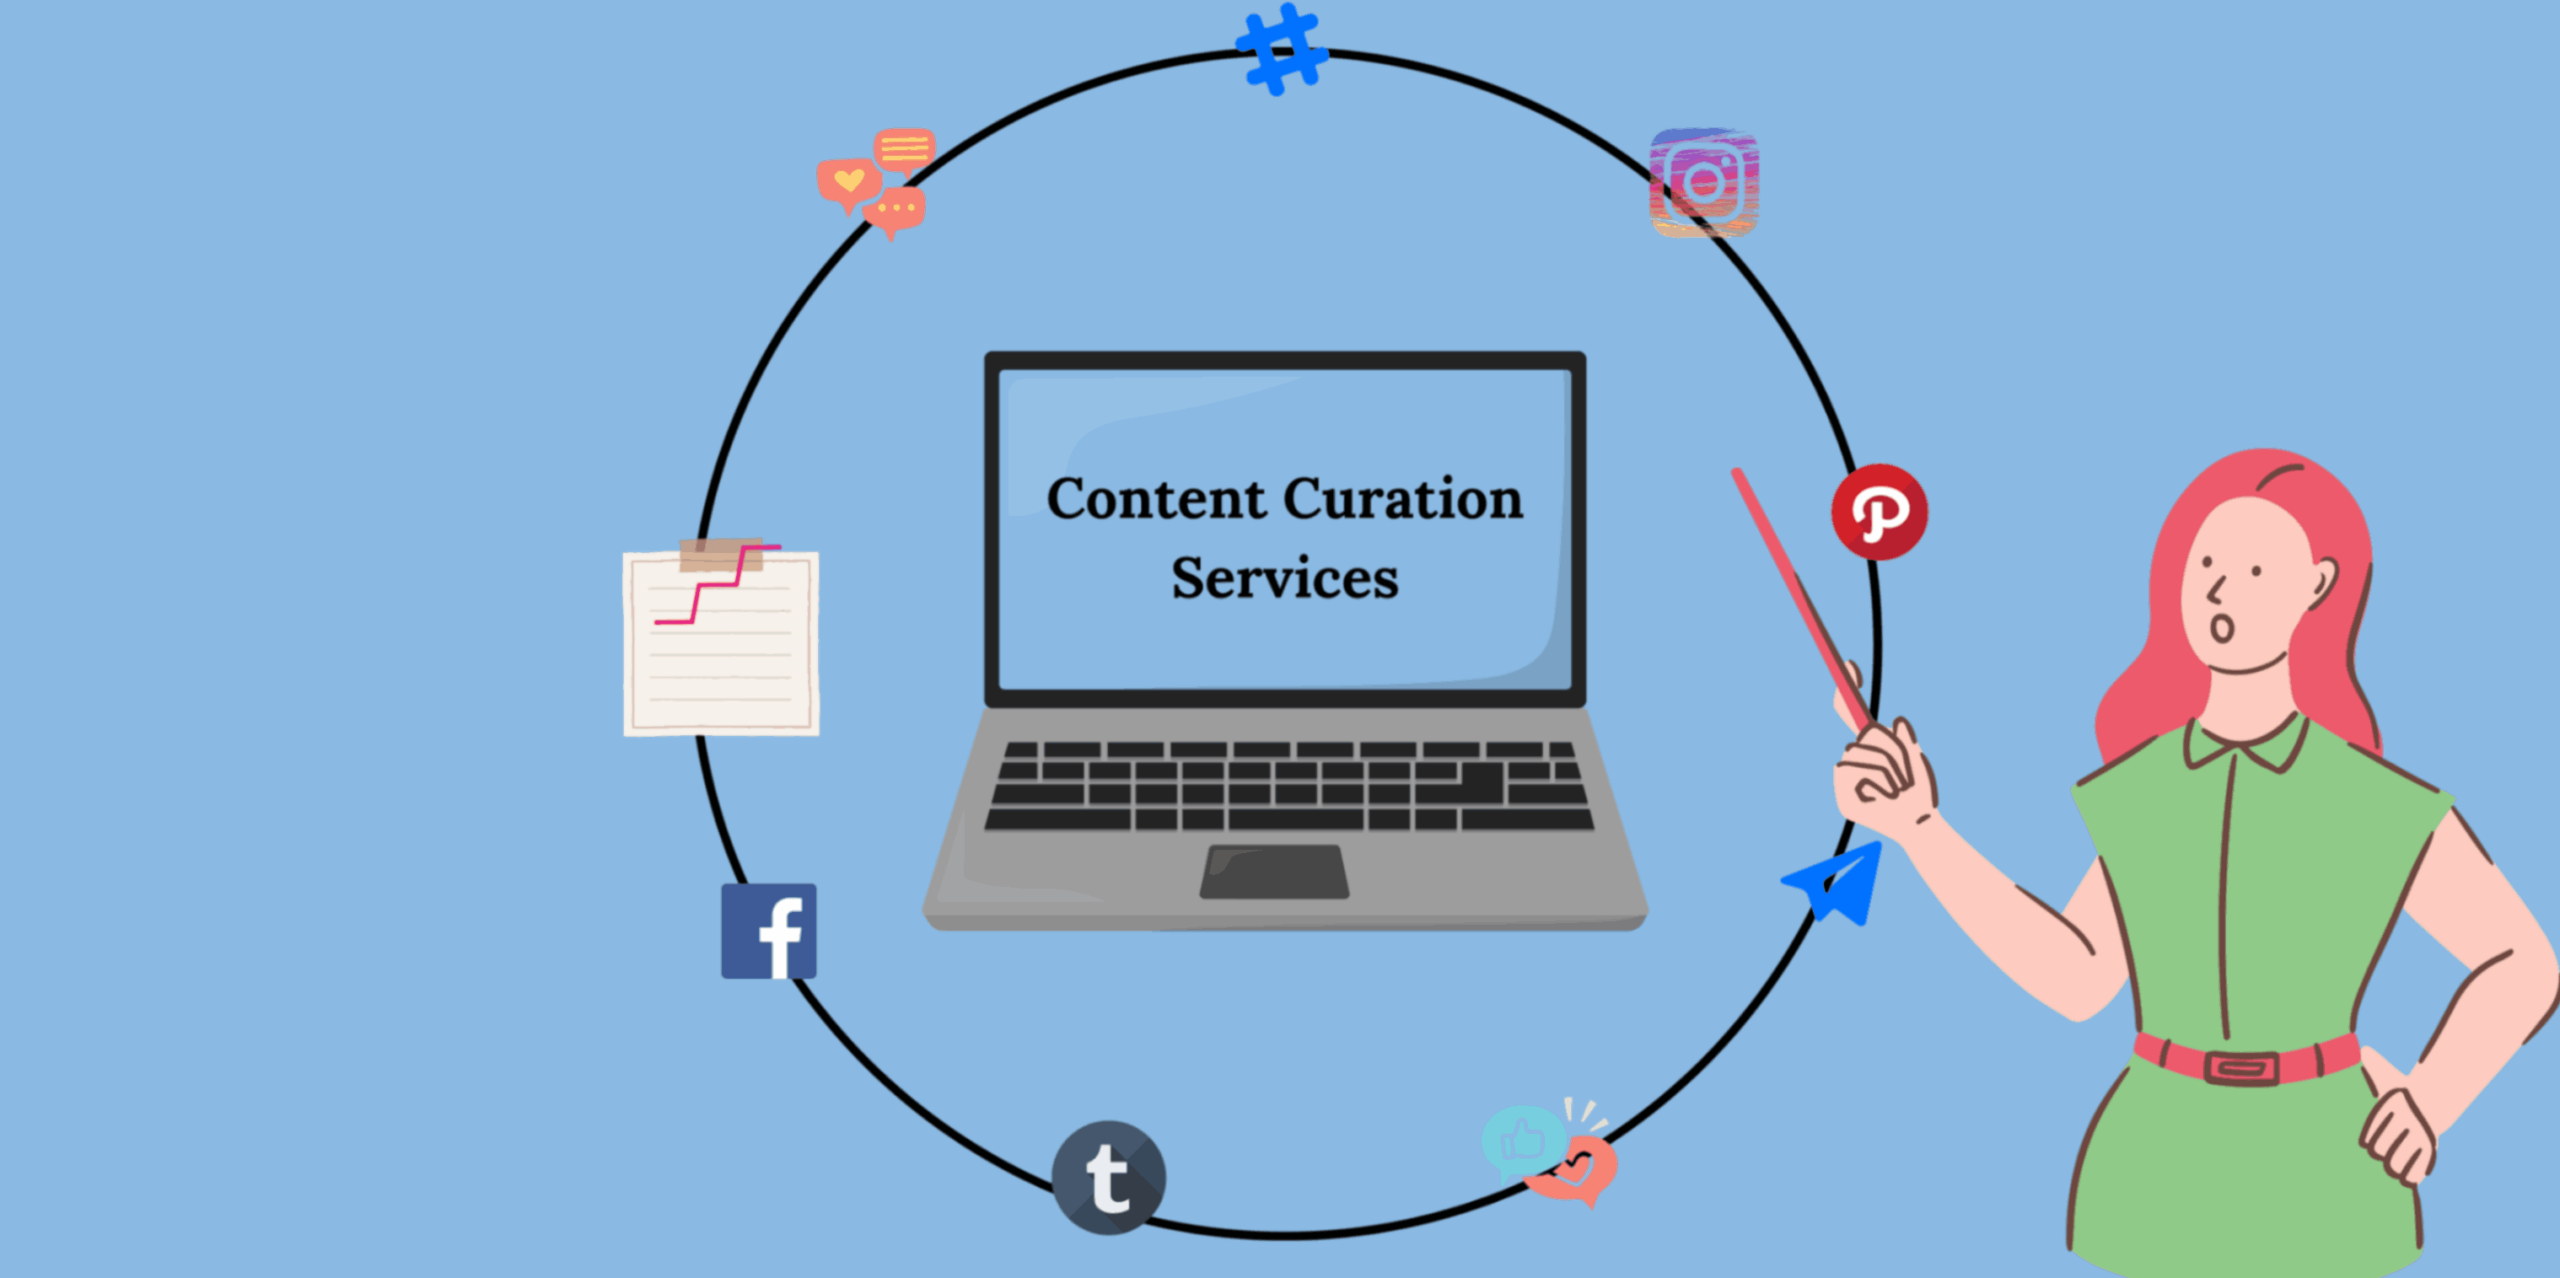 Why Content Curation Services Are Important for Marketers